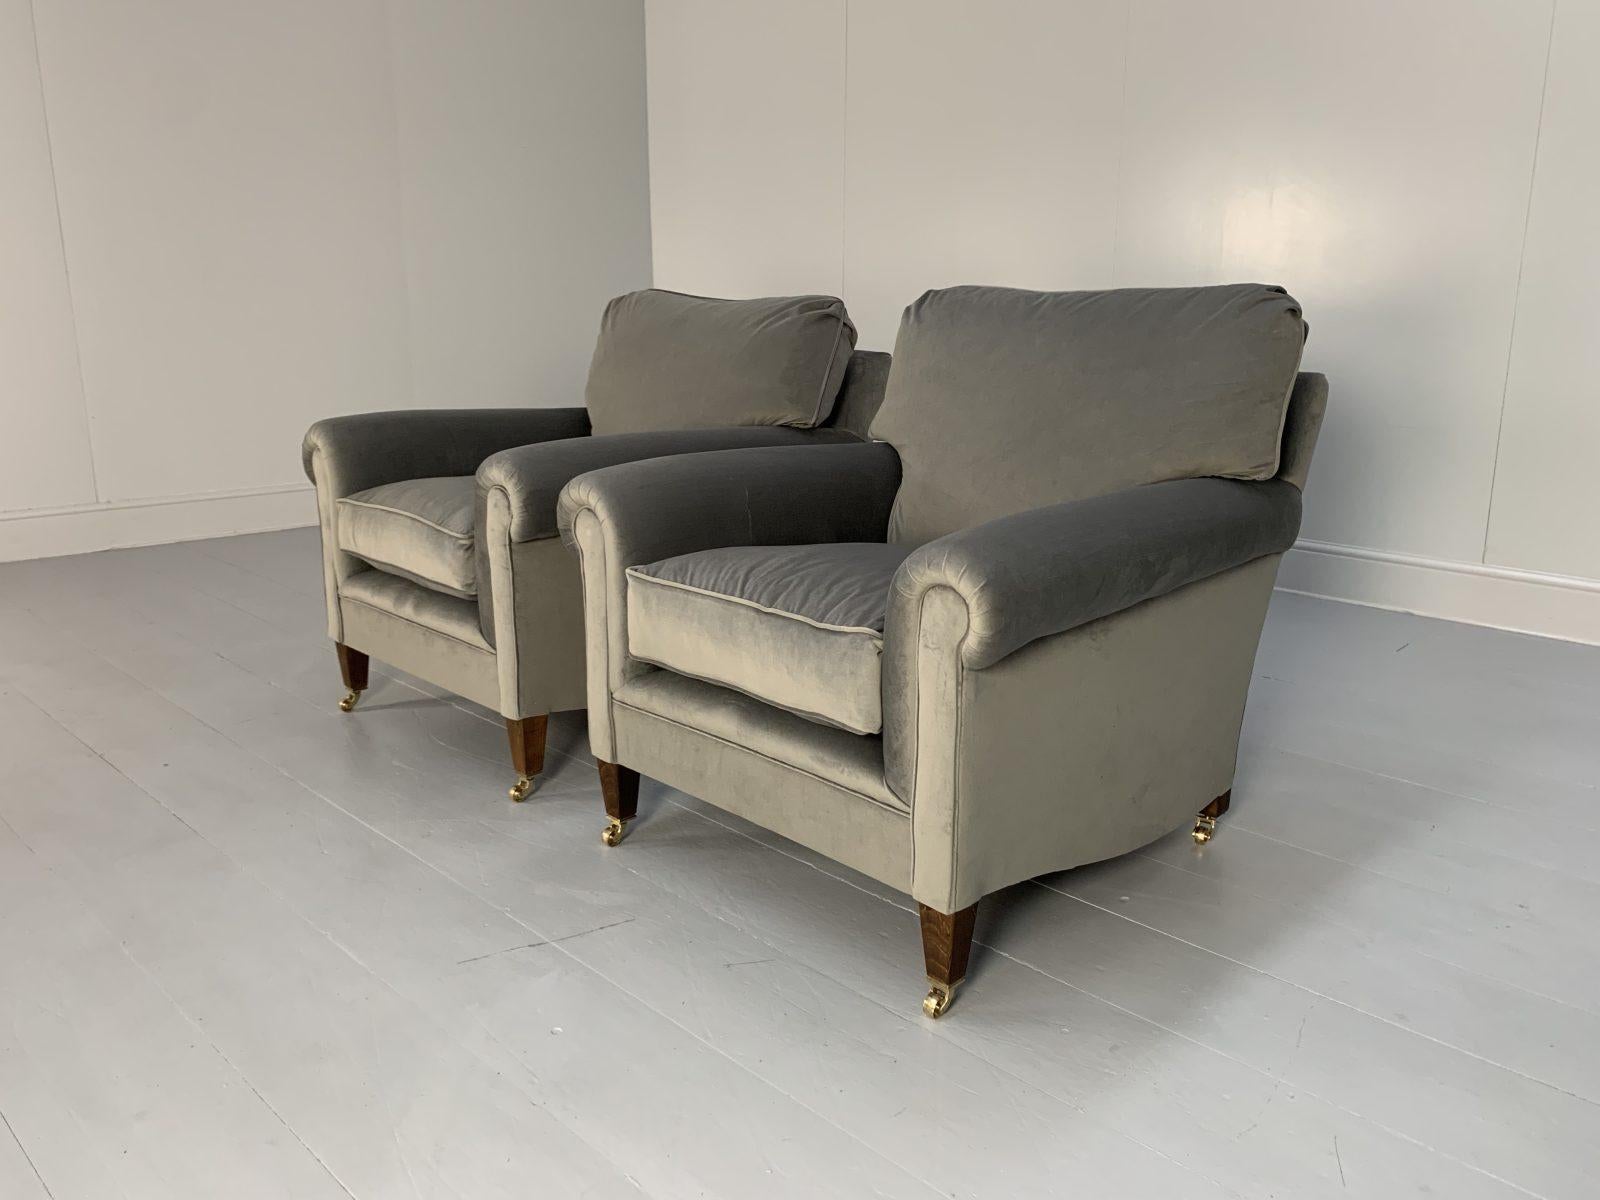 Hello Friends, and welcome to another unmissable offering from Lord Browns Furniture, the UK’s premier resource for fine Sofas and Chairs.

On offer on this occasion is a superb, pristine identical pair of George Smith “Signature” Cushion-Back,